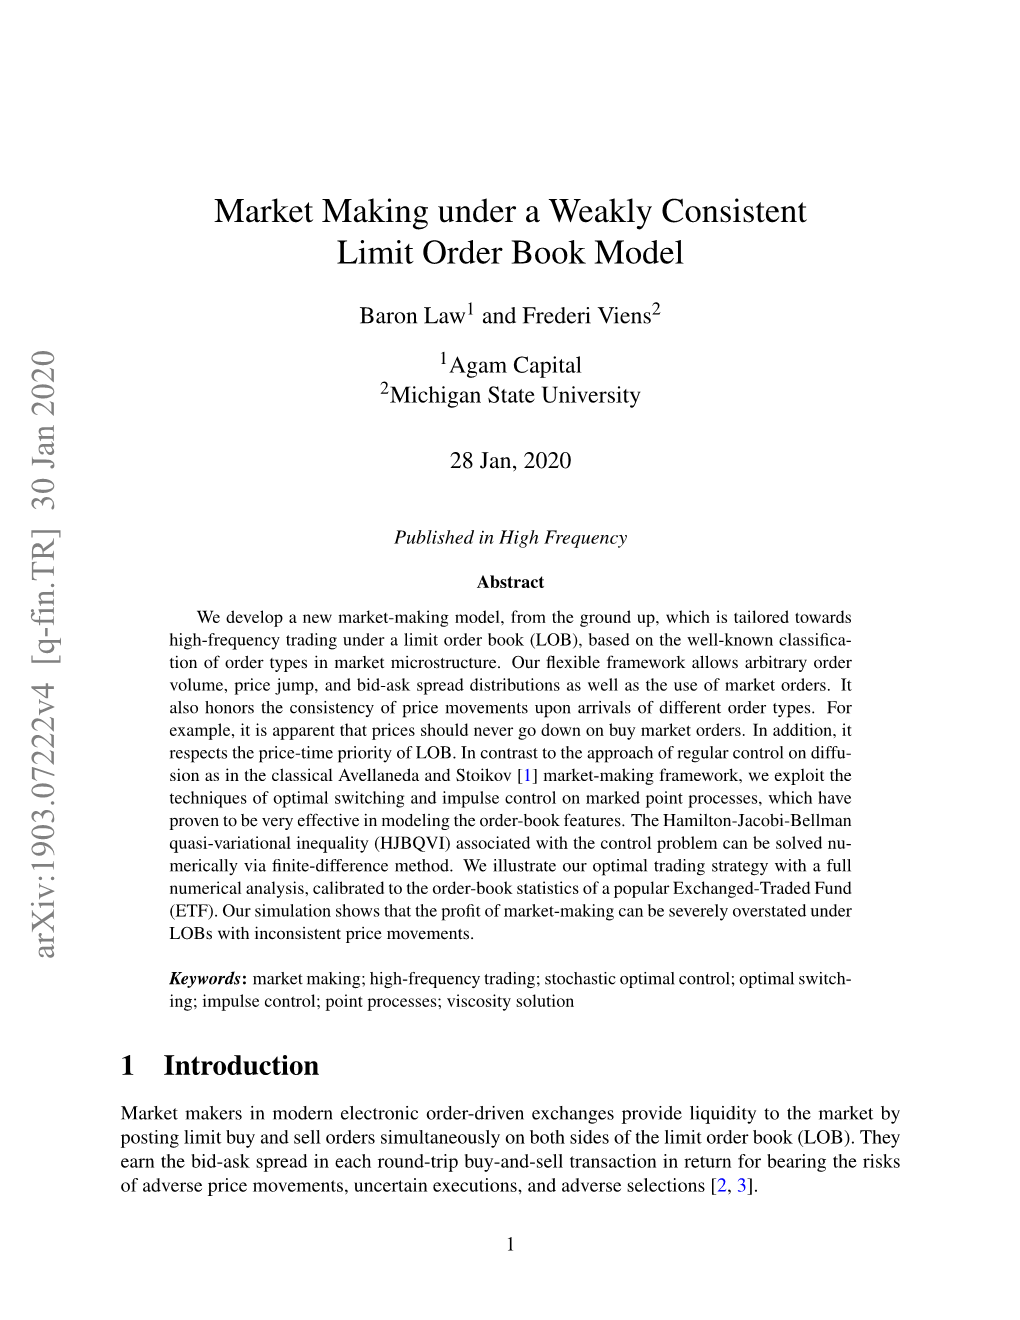 A Pure-Jump Market-Making Model for High-Frequency Trading